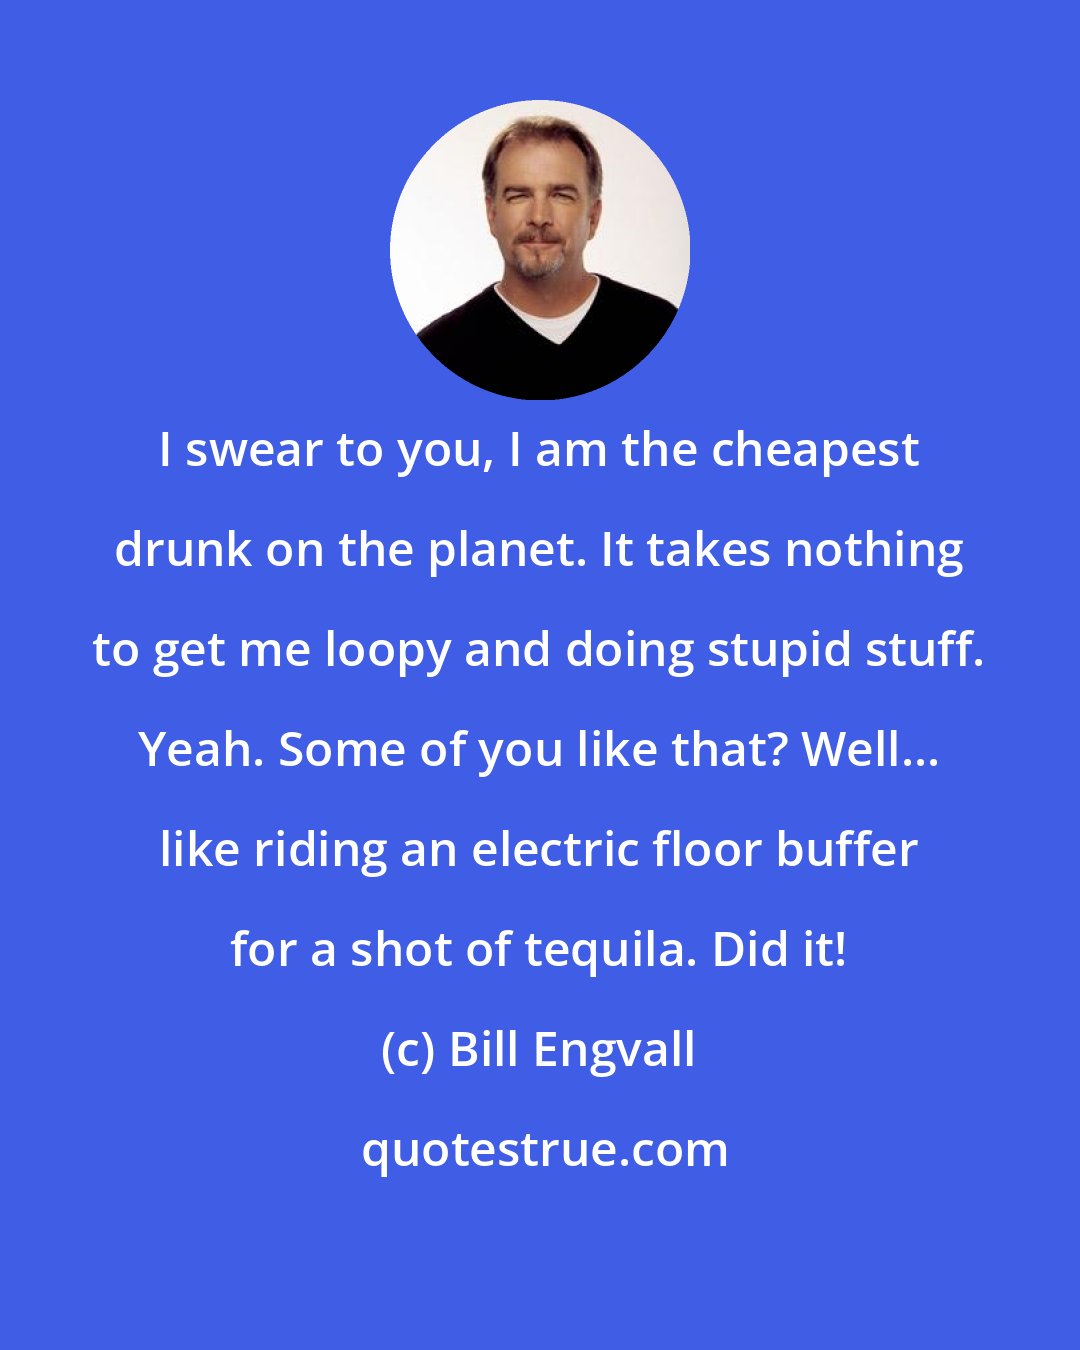 Bill Engvall: I swear to you, I am the cheapest drunk on the planet. It takes nothing to get me loopy and doing stupid stuff. Yeah. Some of you like that? Well... like riding an electric floor buffer for a shot of tequila. Did it!